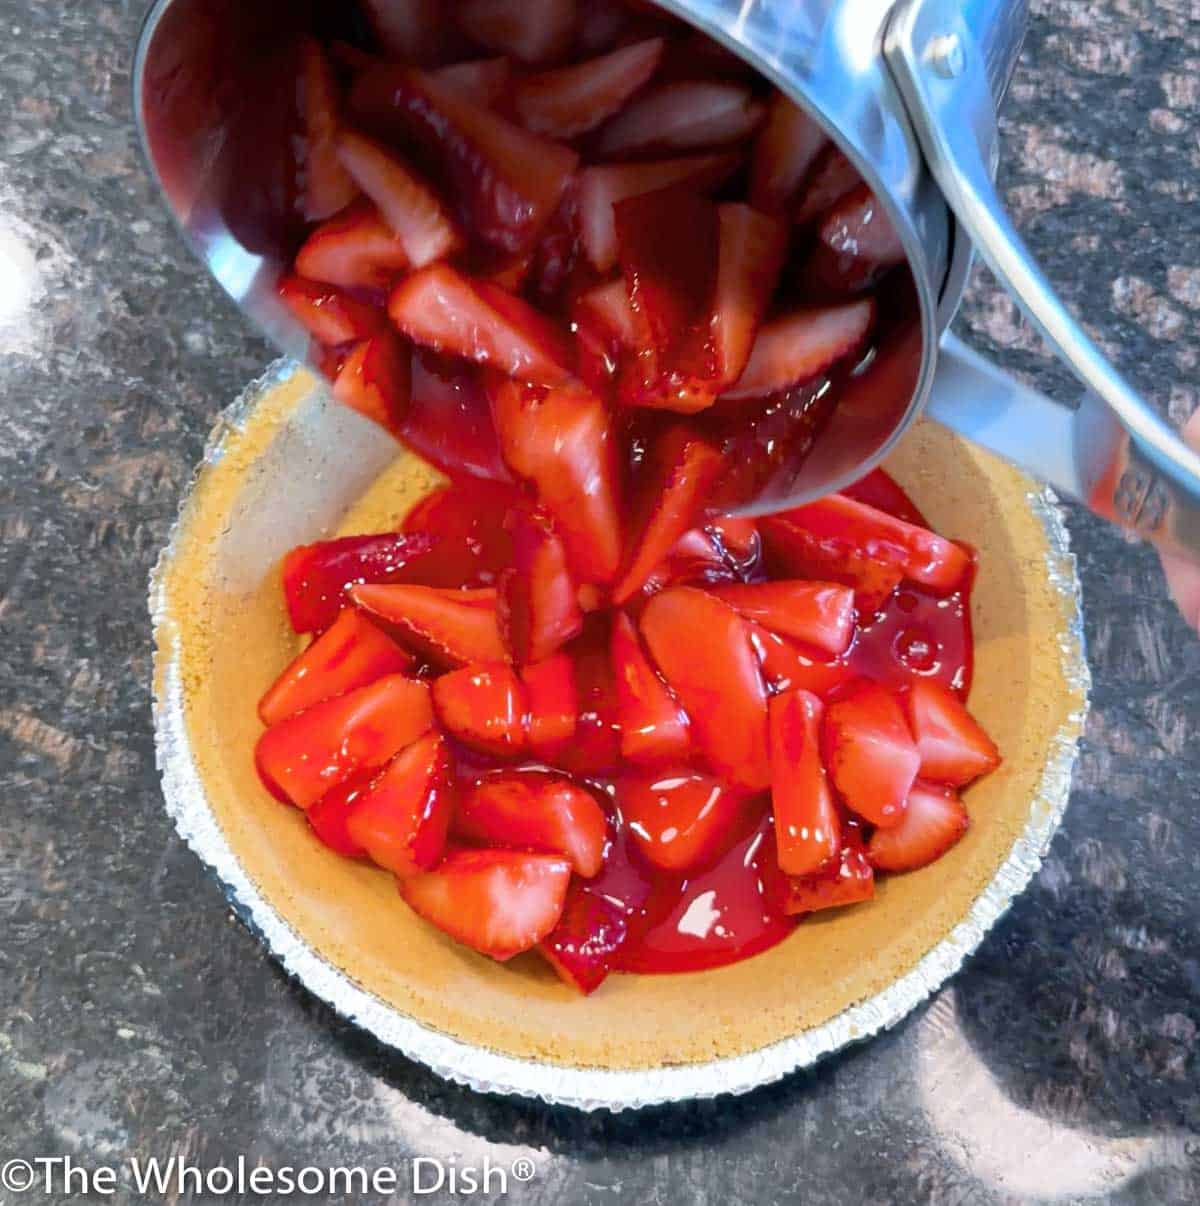 Pouring strawberries coated in sweetened gelatin into a graham cracker pie crust.